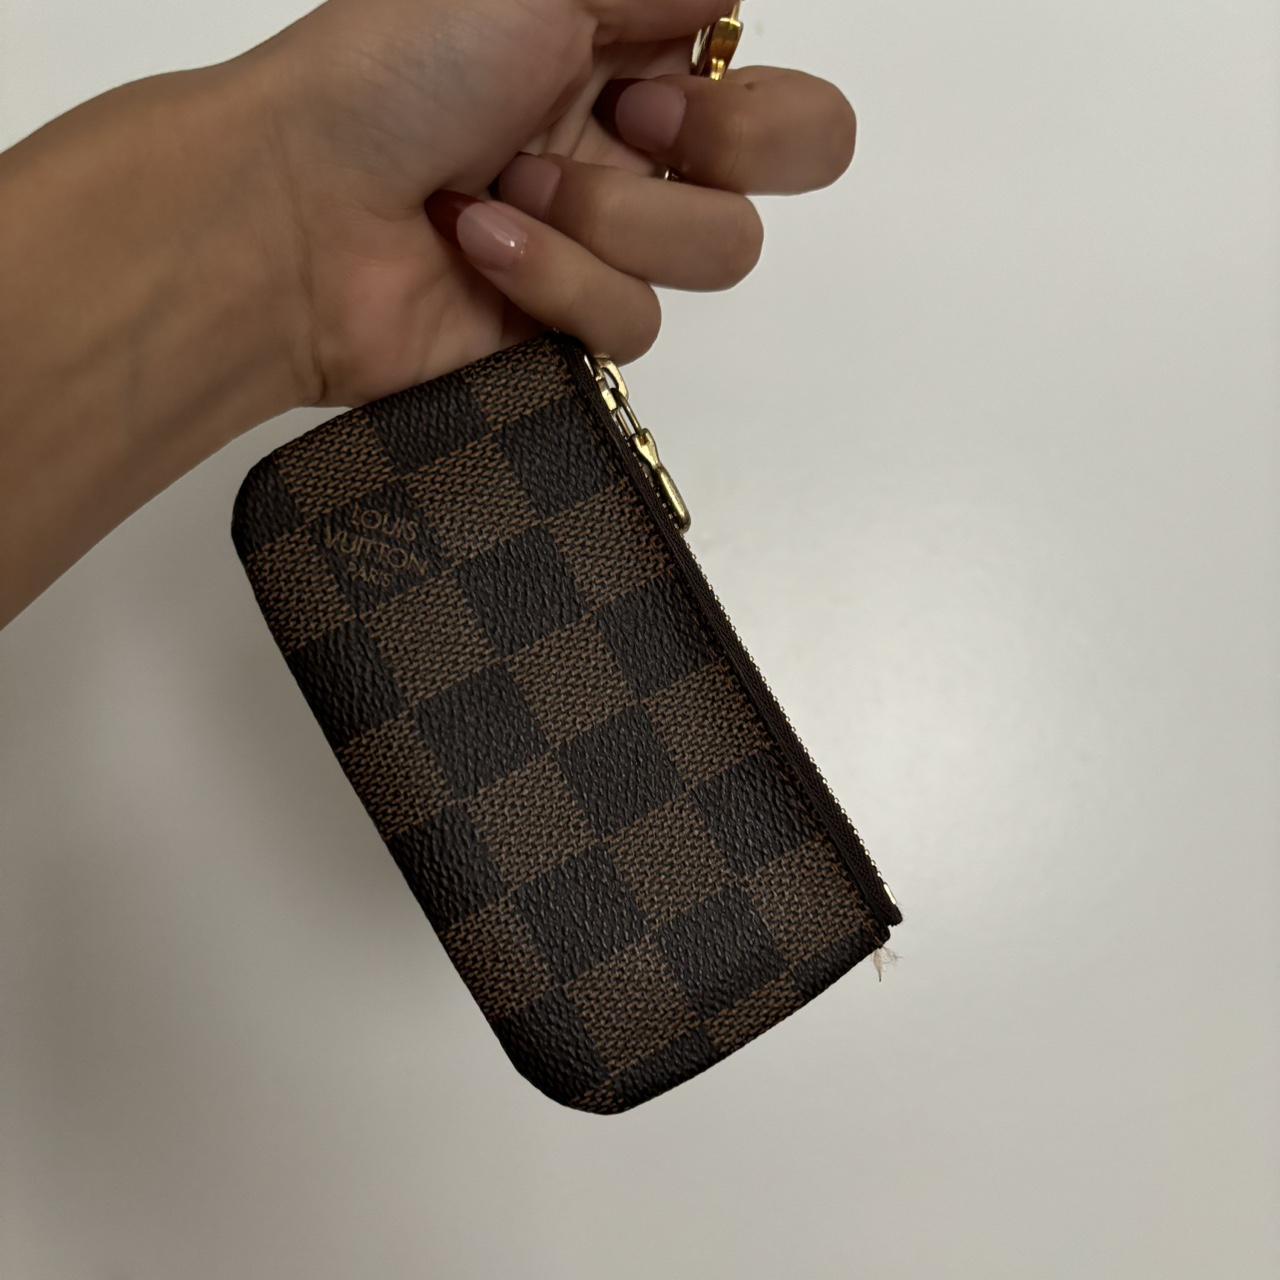 ✈️FREE SHIPPING✈️ Hand stitched Louis Vuitton key ring - Depop